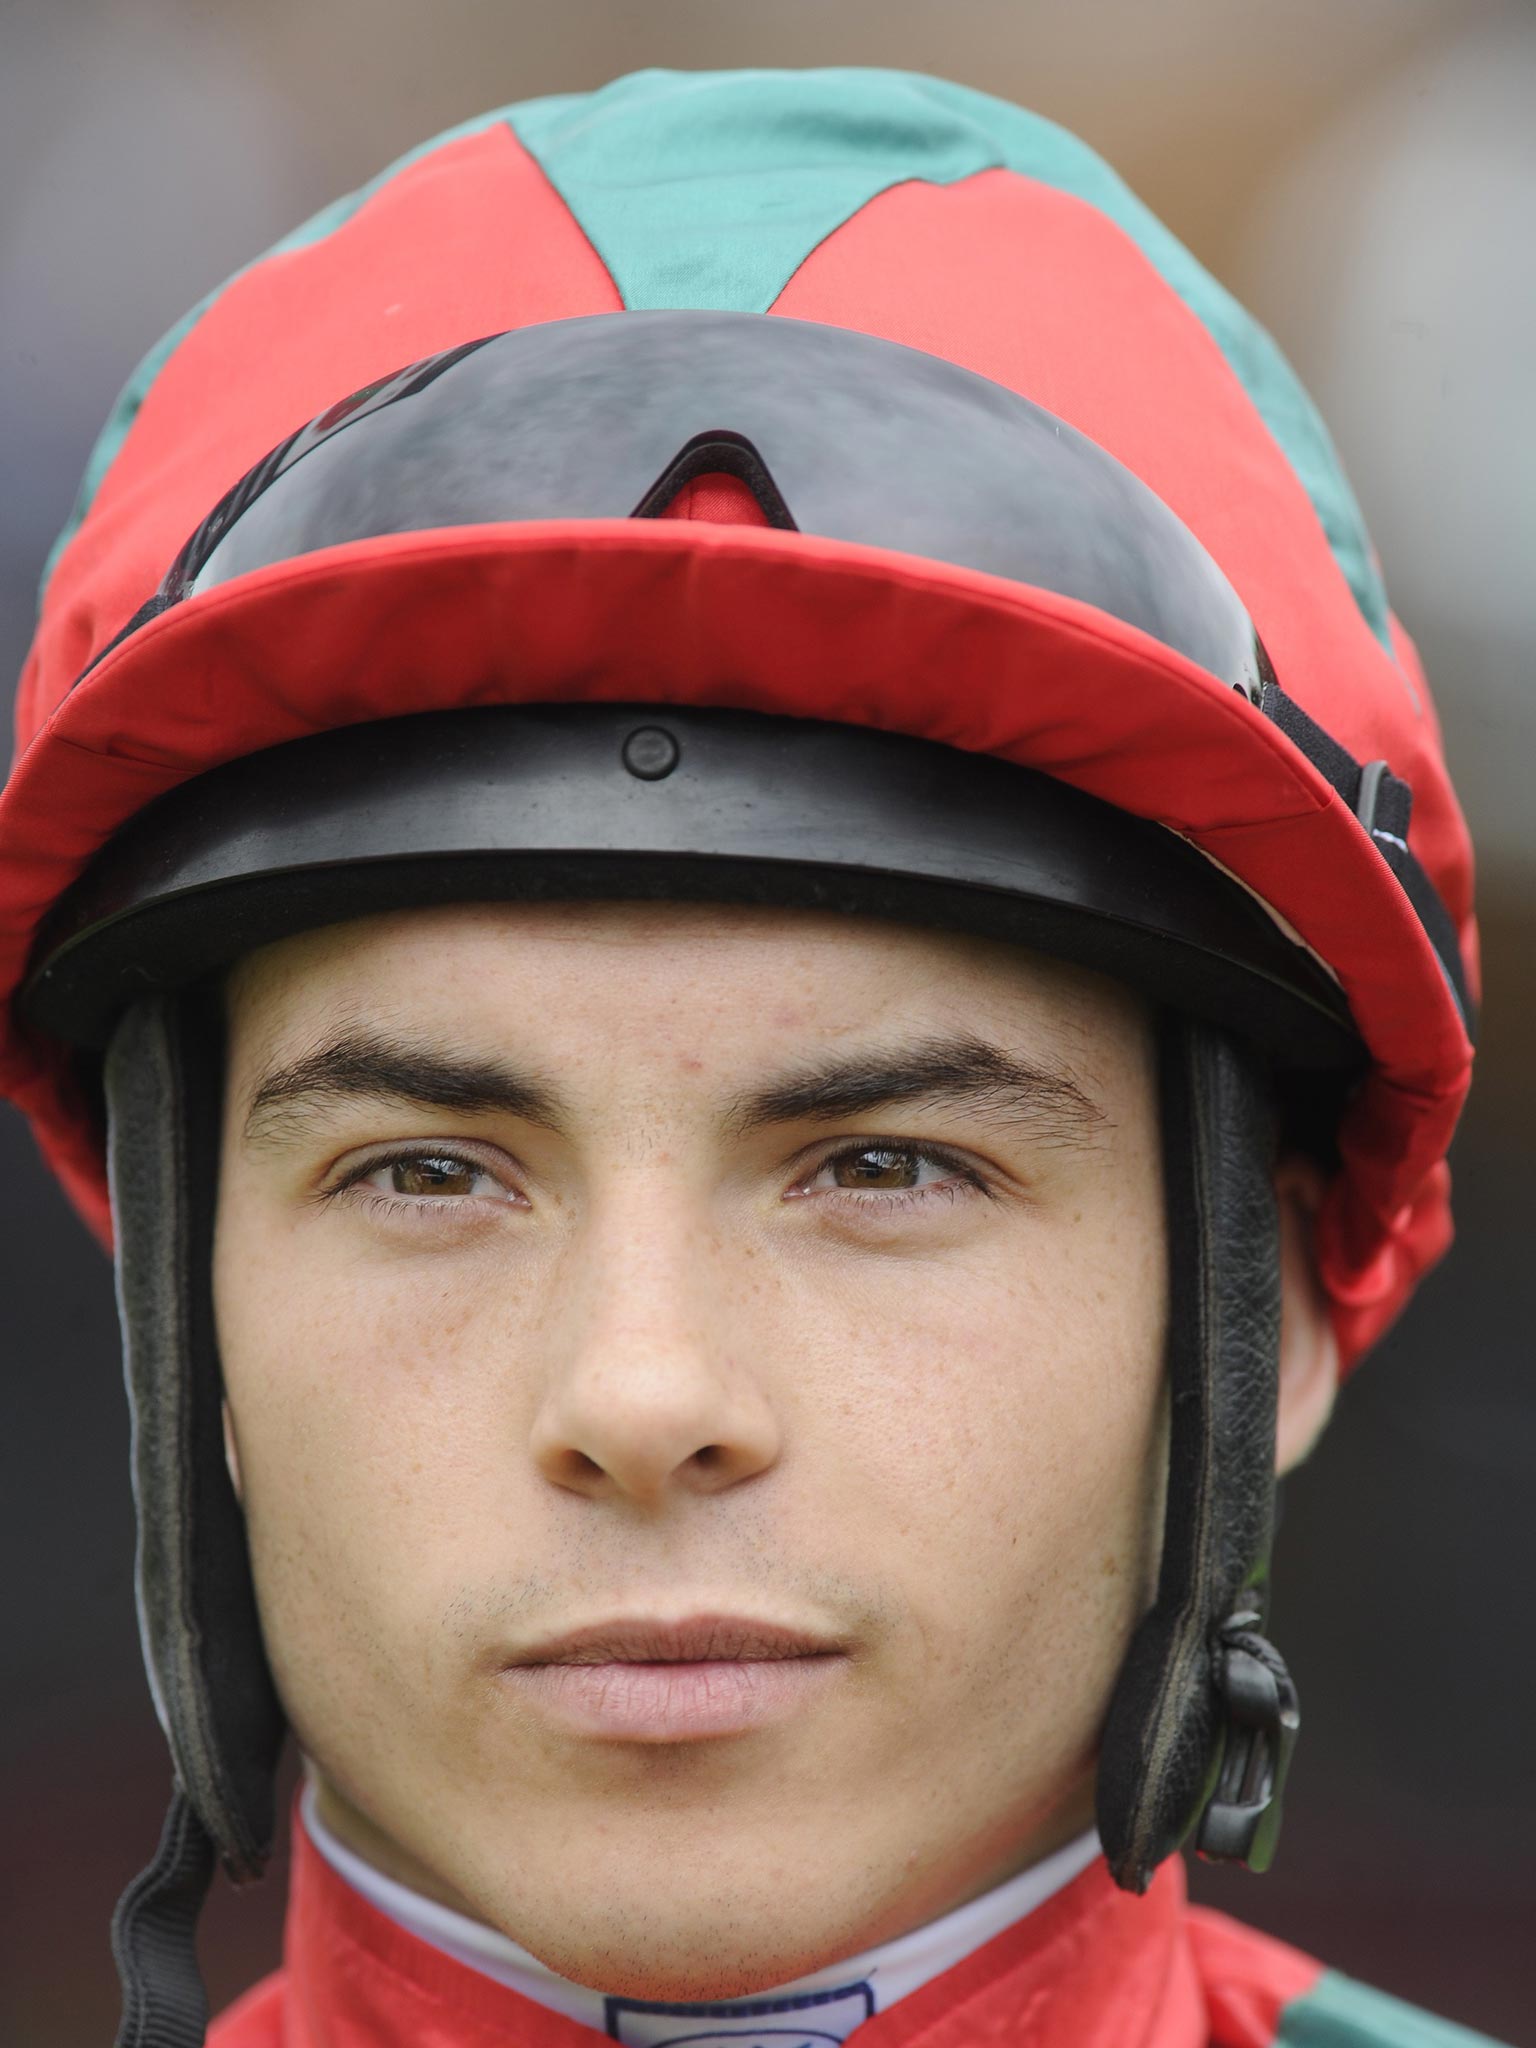 Maxime Guyon stormed to victory over Certify on L’Amour De Ma
Vie at Meydan yesterday